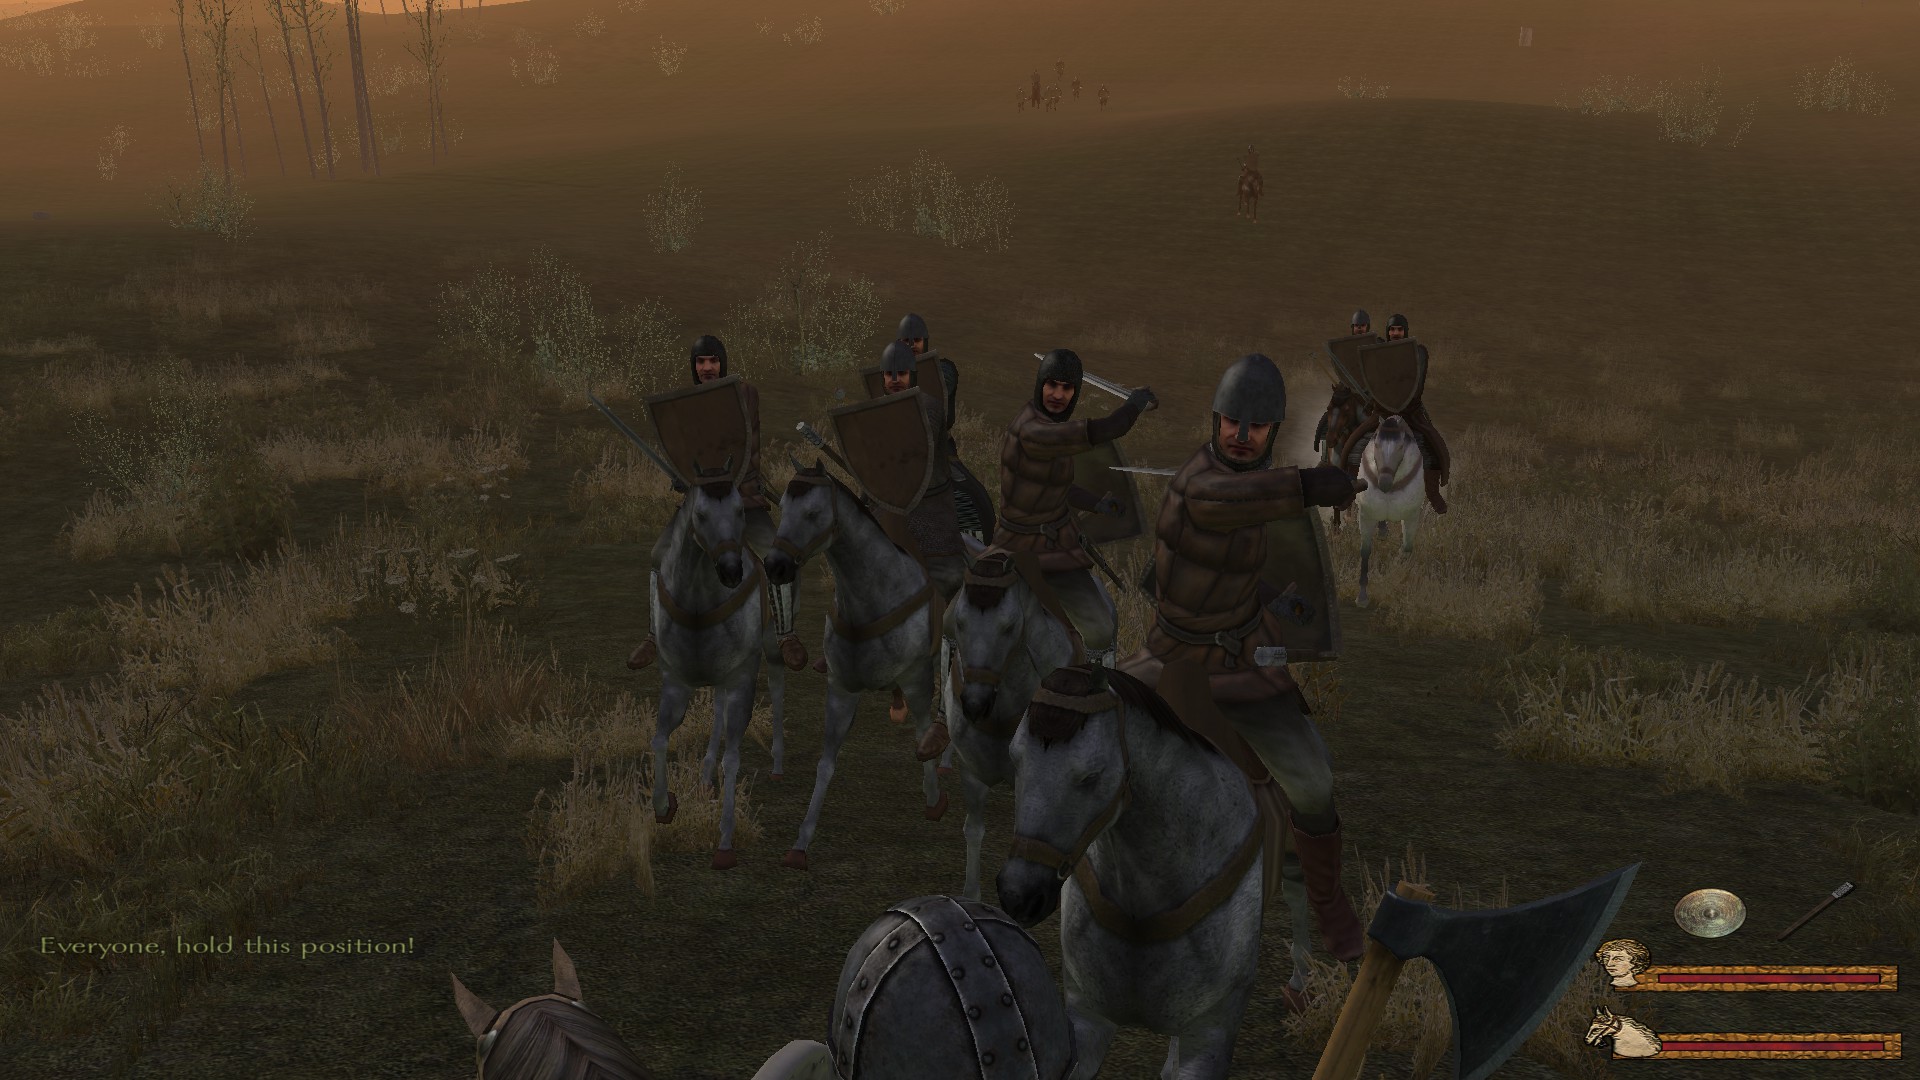 Have you ever seen Warband look so good? [A Clash Of Kings Mod